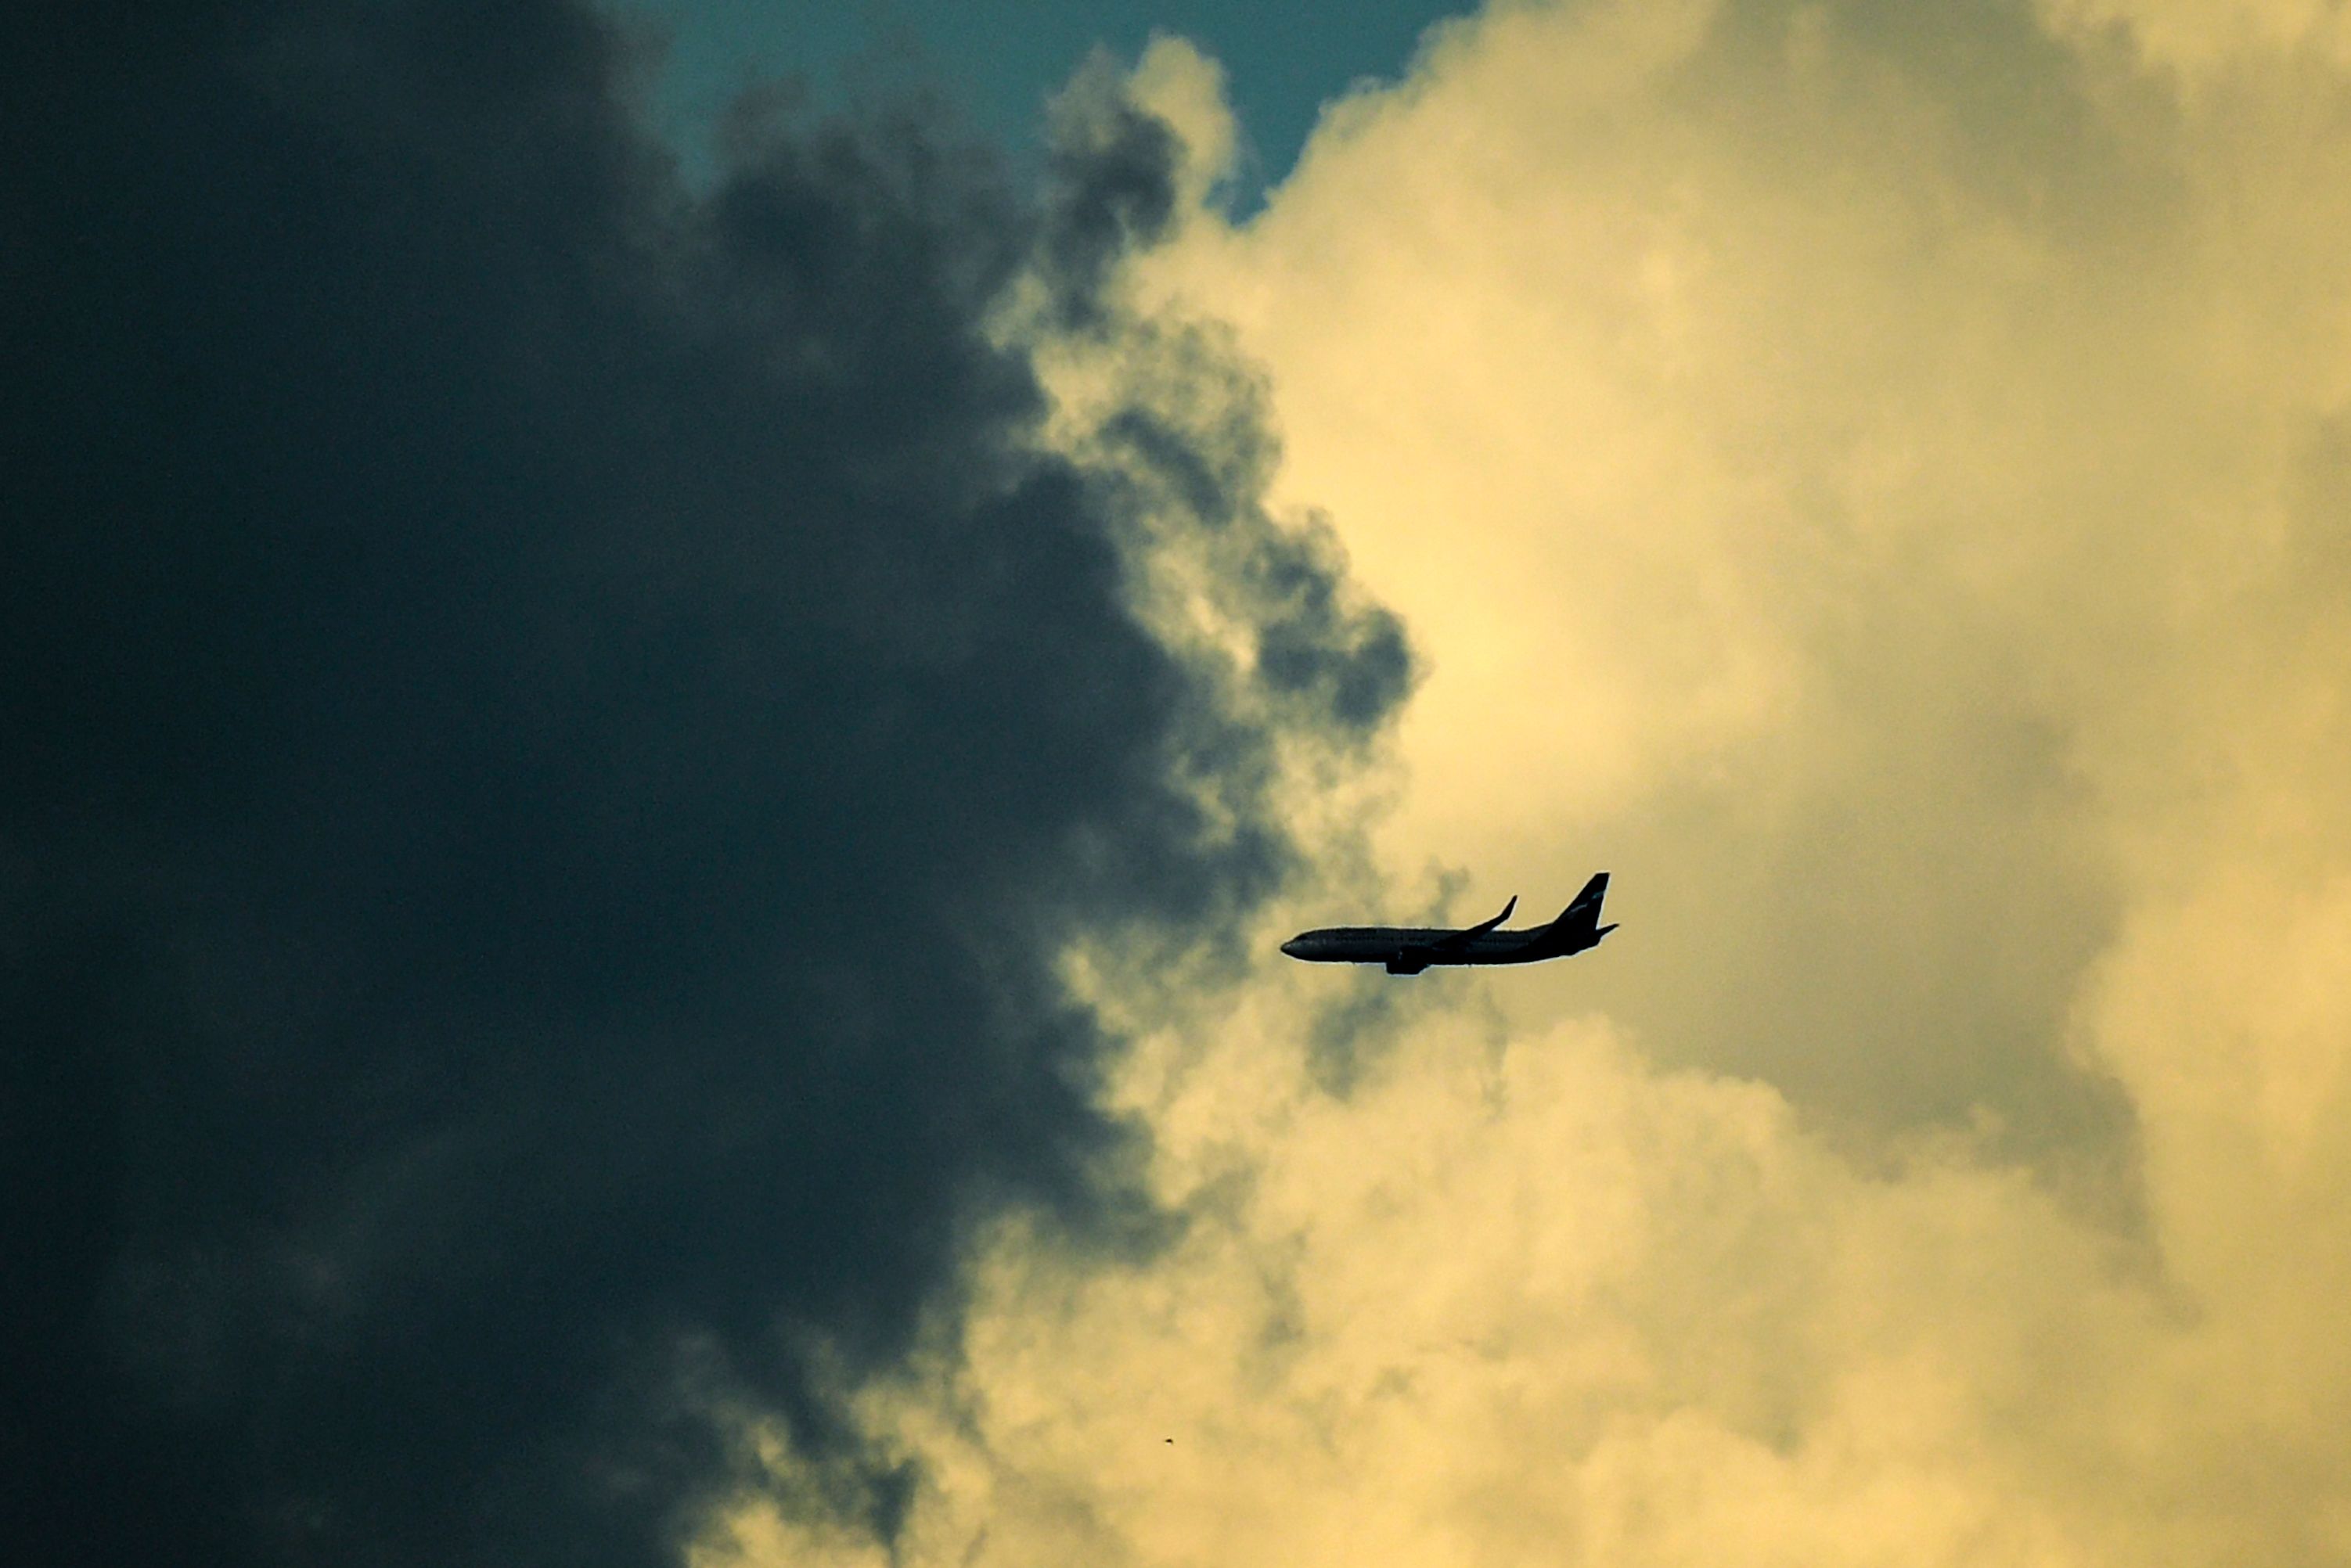 Turbulence Clouds Storm Aircraft Plane' data-img-url='https://static1.simpleflyingimages.com/wordpress/wp-content/uploads/2022/07/GettyImages-1215625223.jpg